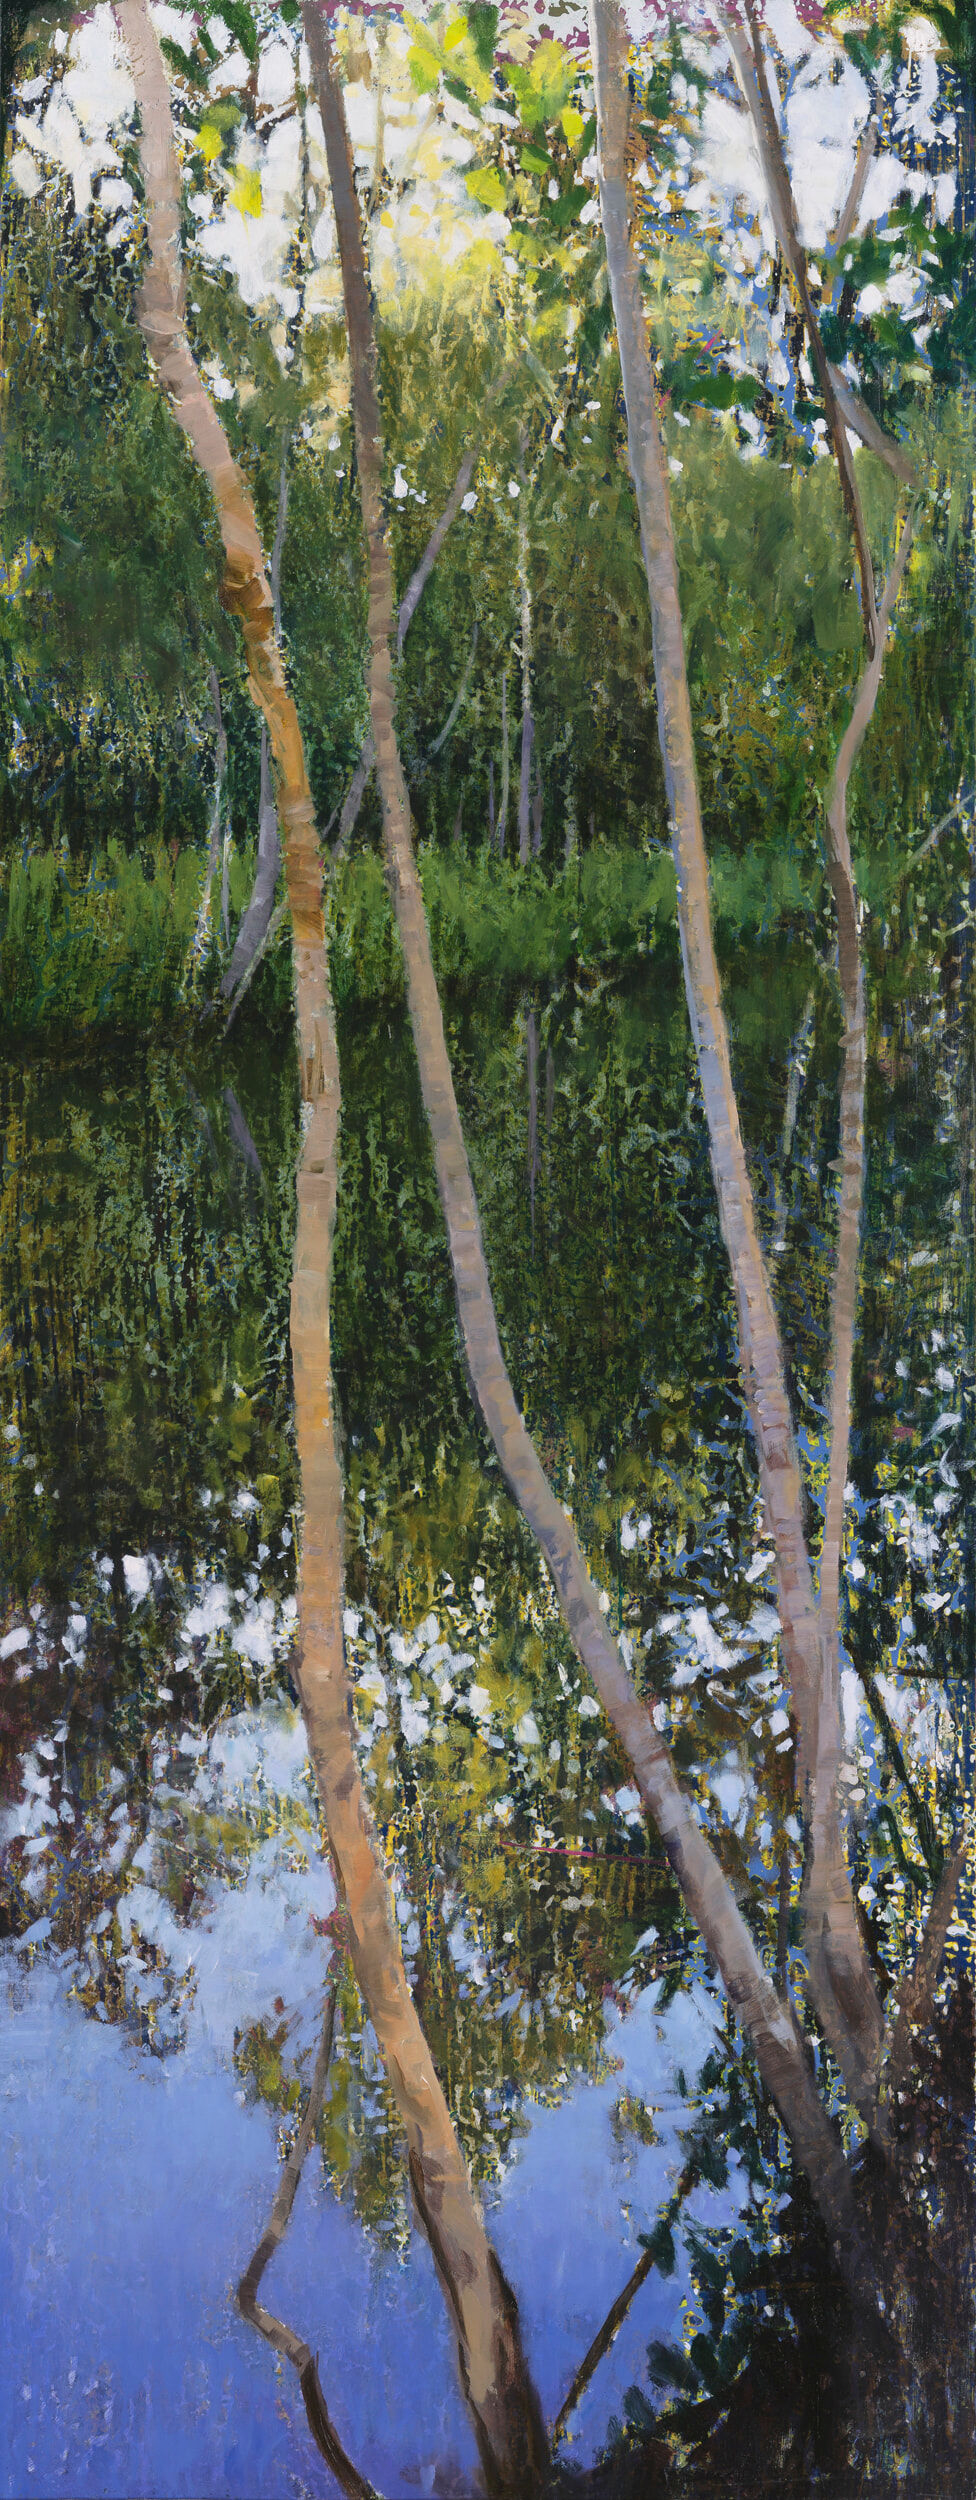 AJ Taylor, Riverbank and Refection, Murdering Creek, 2020, oil on board, 70 x 27.5 cm